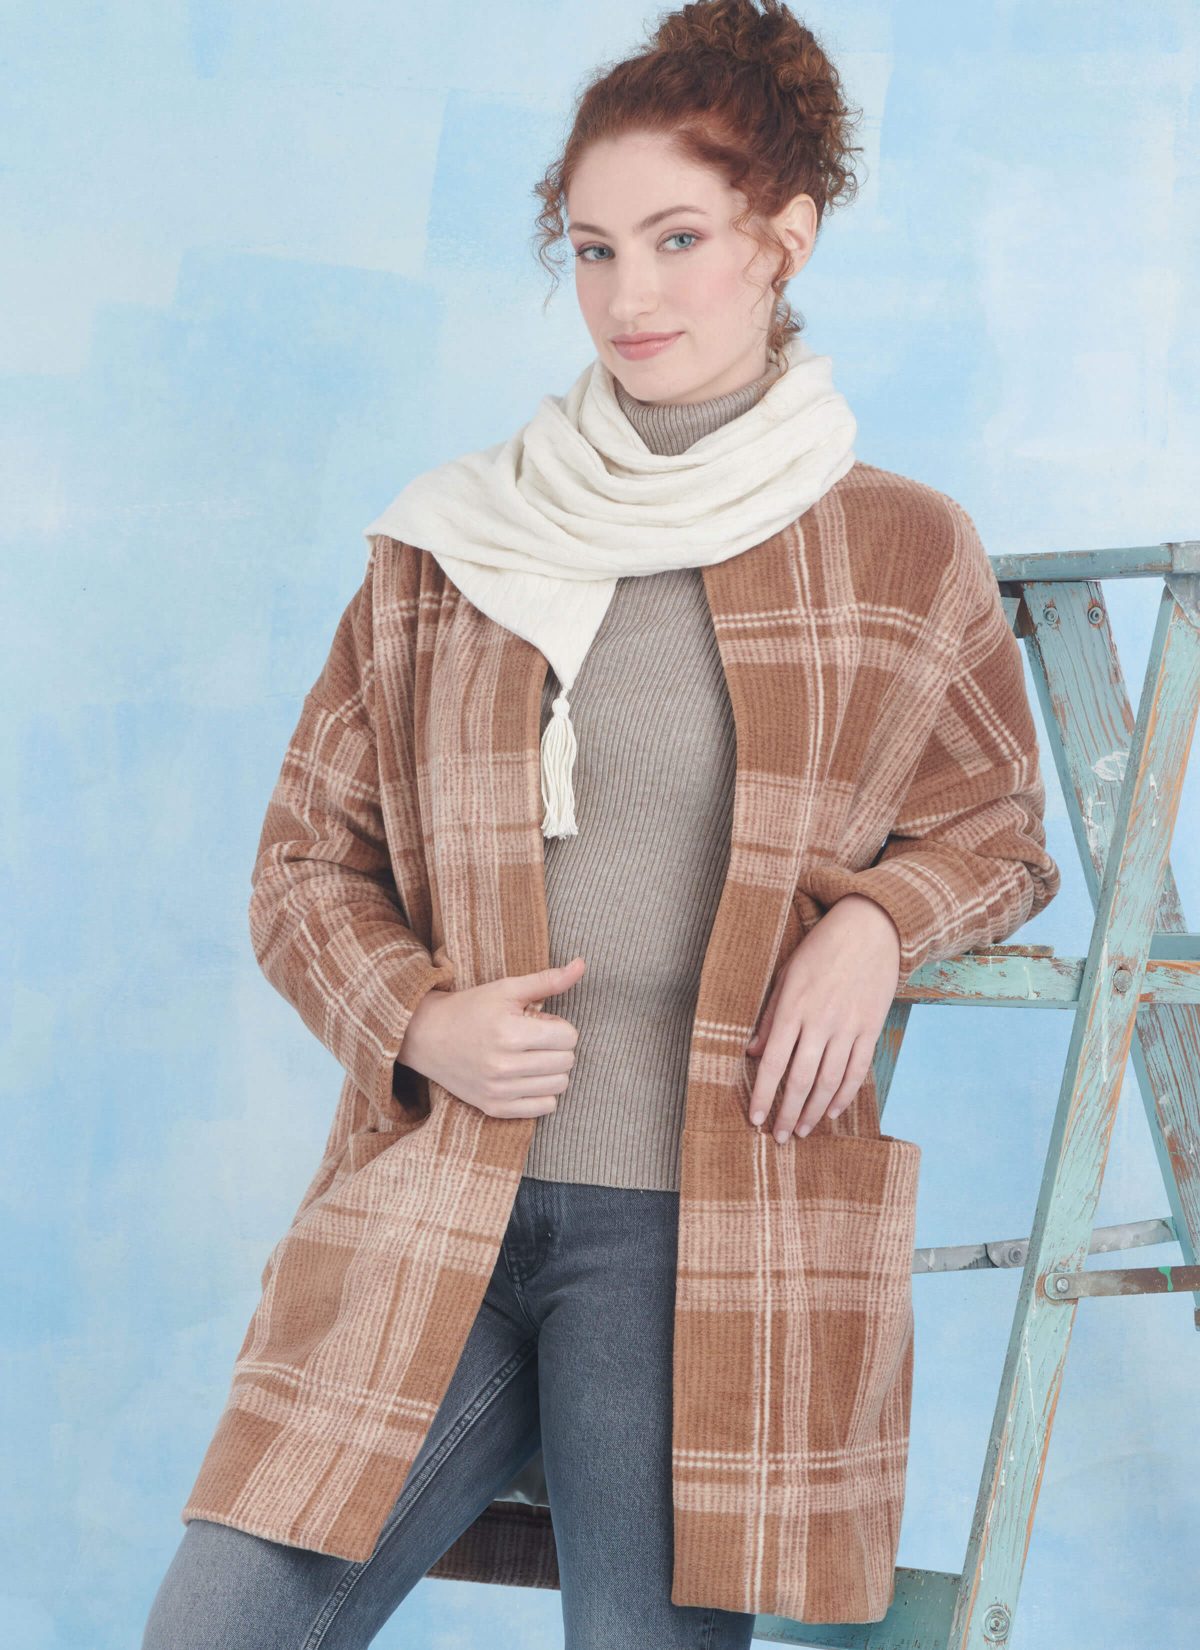 Simplicity Sewing Pattern S9853 Misses' Coats and Scarf by Elaine Heigl Designs